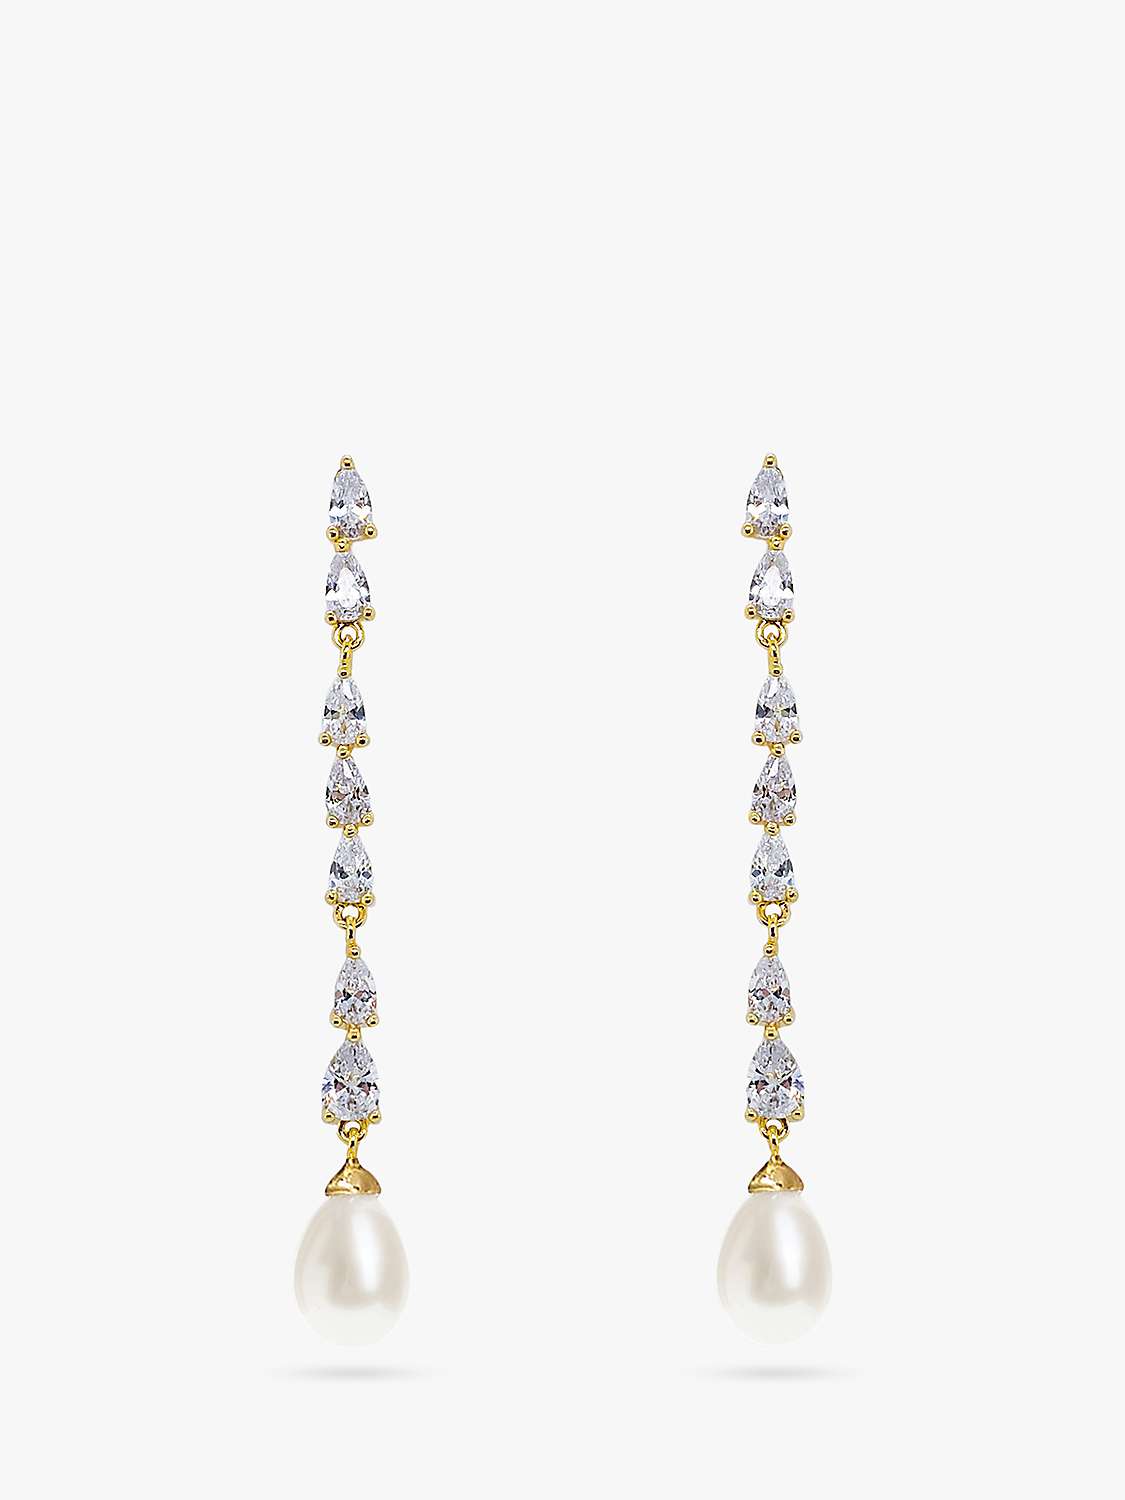 Buy Ivory & Co. Melbourne Crystal & Faux Pearl Drop Earrings Online at johnlewis.com